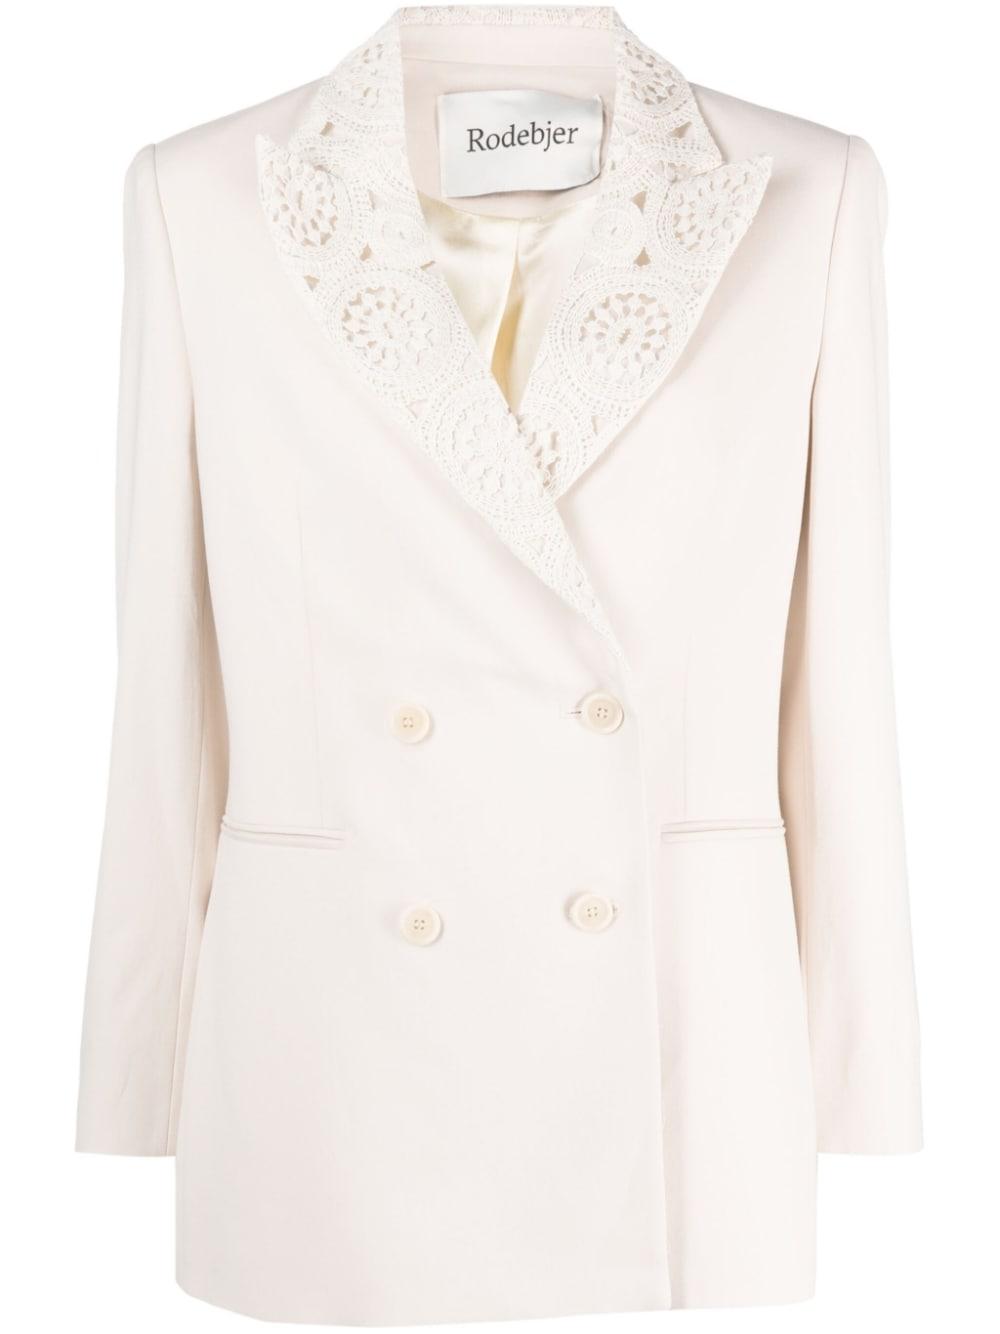 Rodebjer Double-breasted Crochet Blazer in White | Lyst